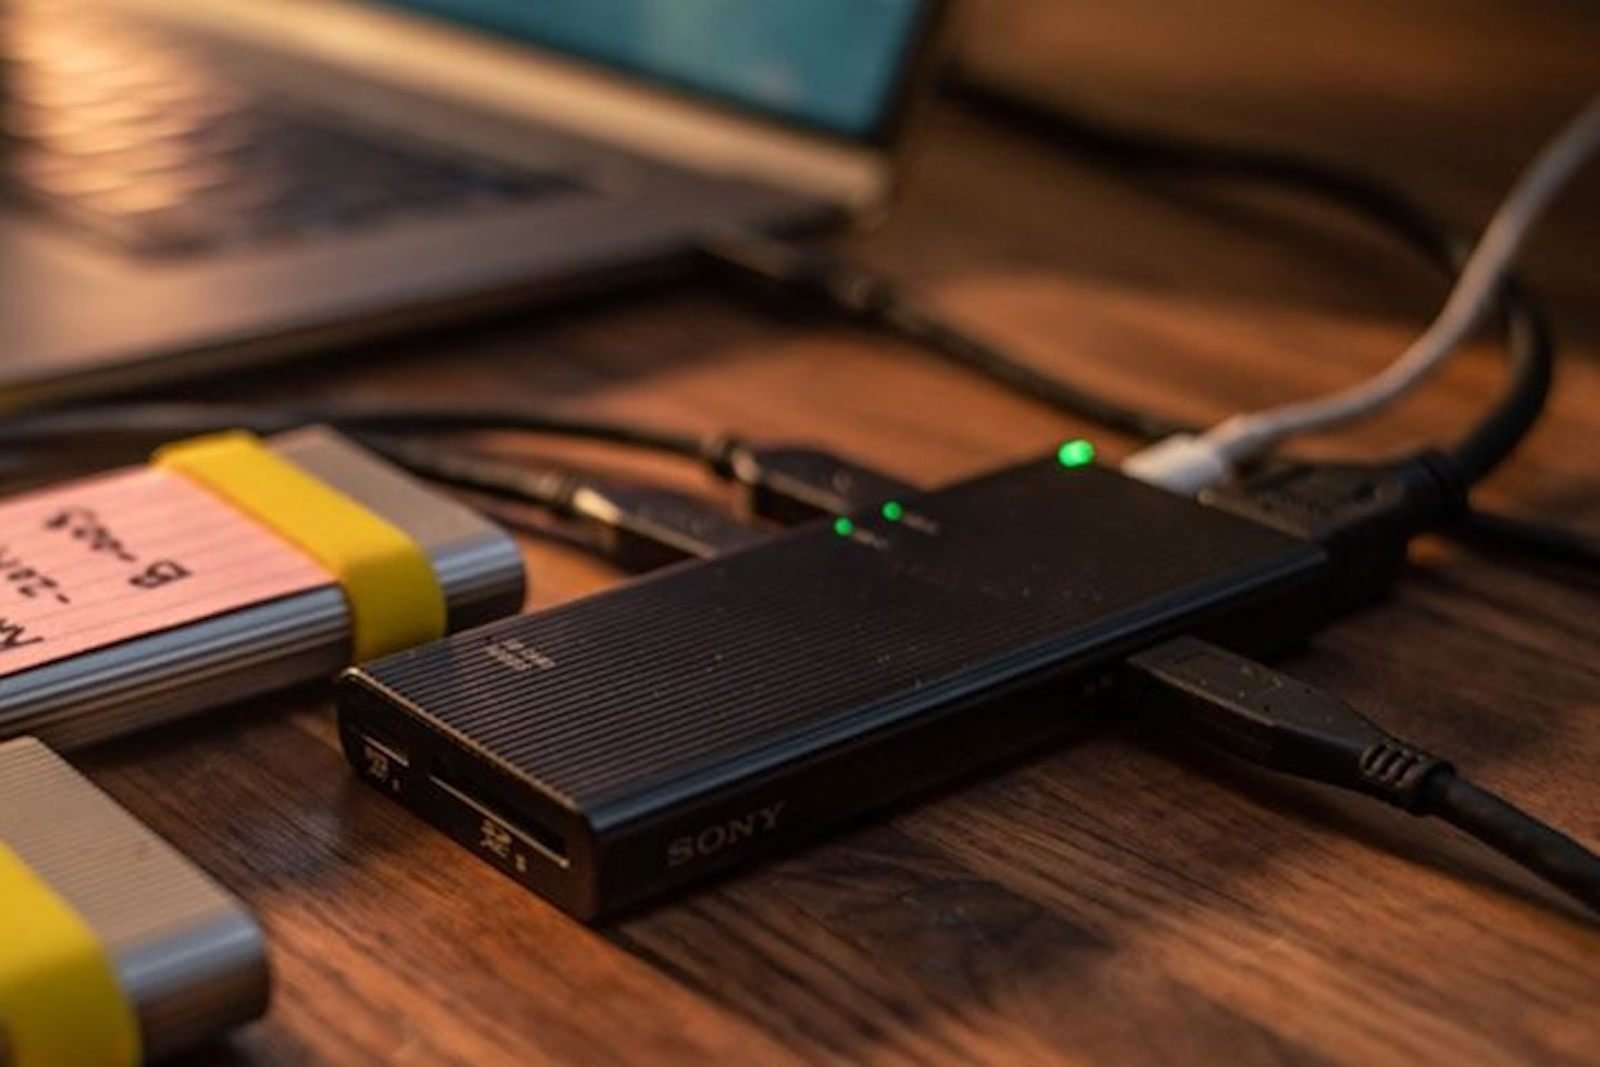 Sony Debuts Worlds Fastest USB Hub with Card Reader and HDMI Support